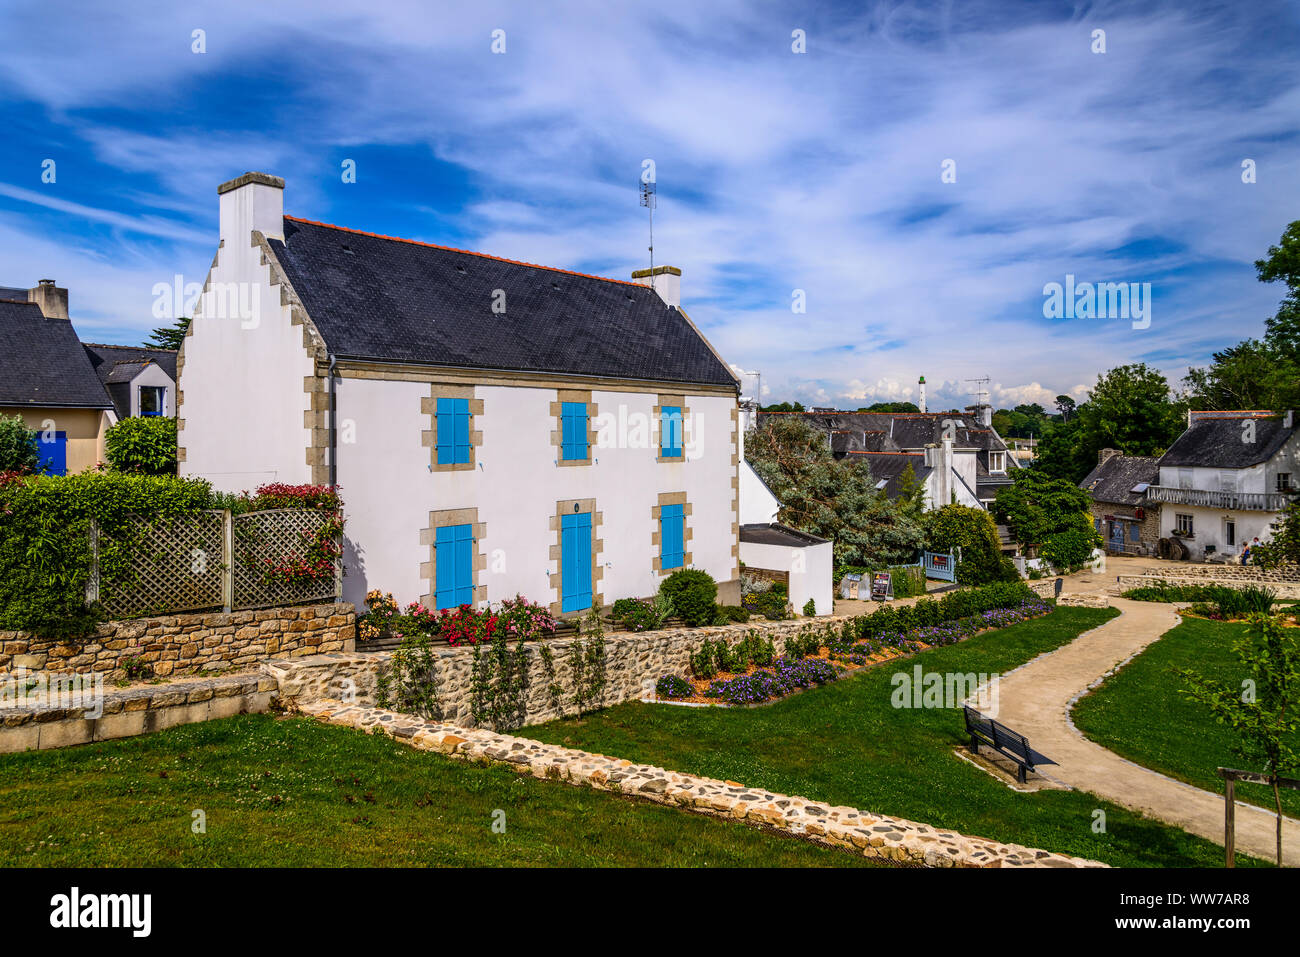 France, Brittany, FinistÃ¨re Department, Sainte-Marine, park near access to port Stock Photo